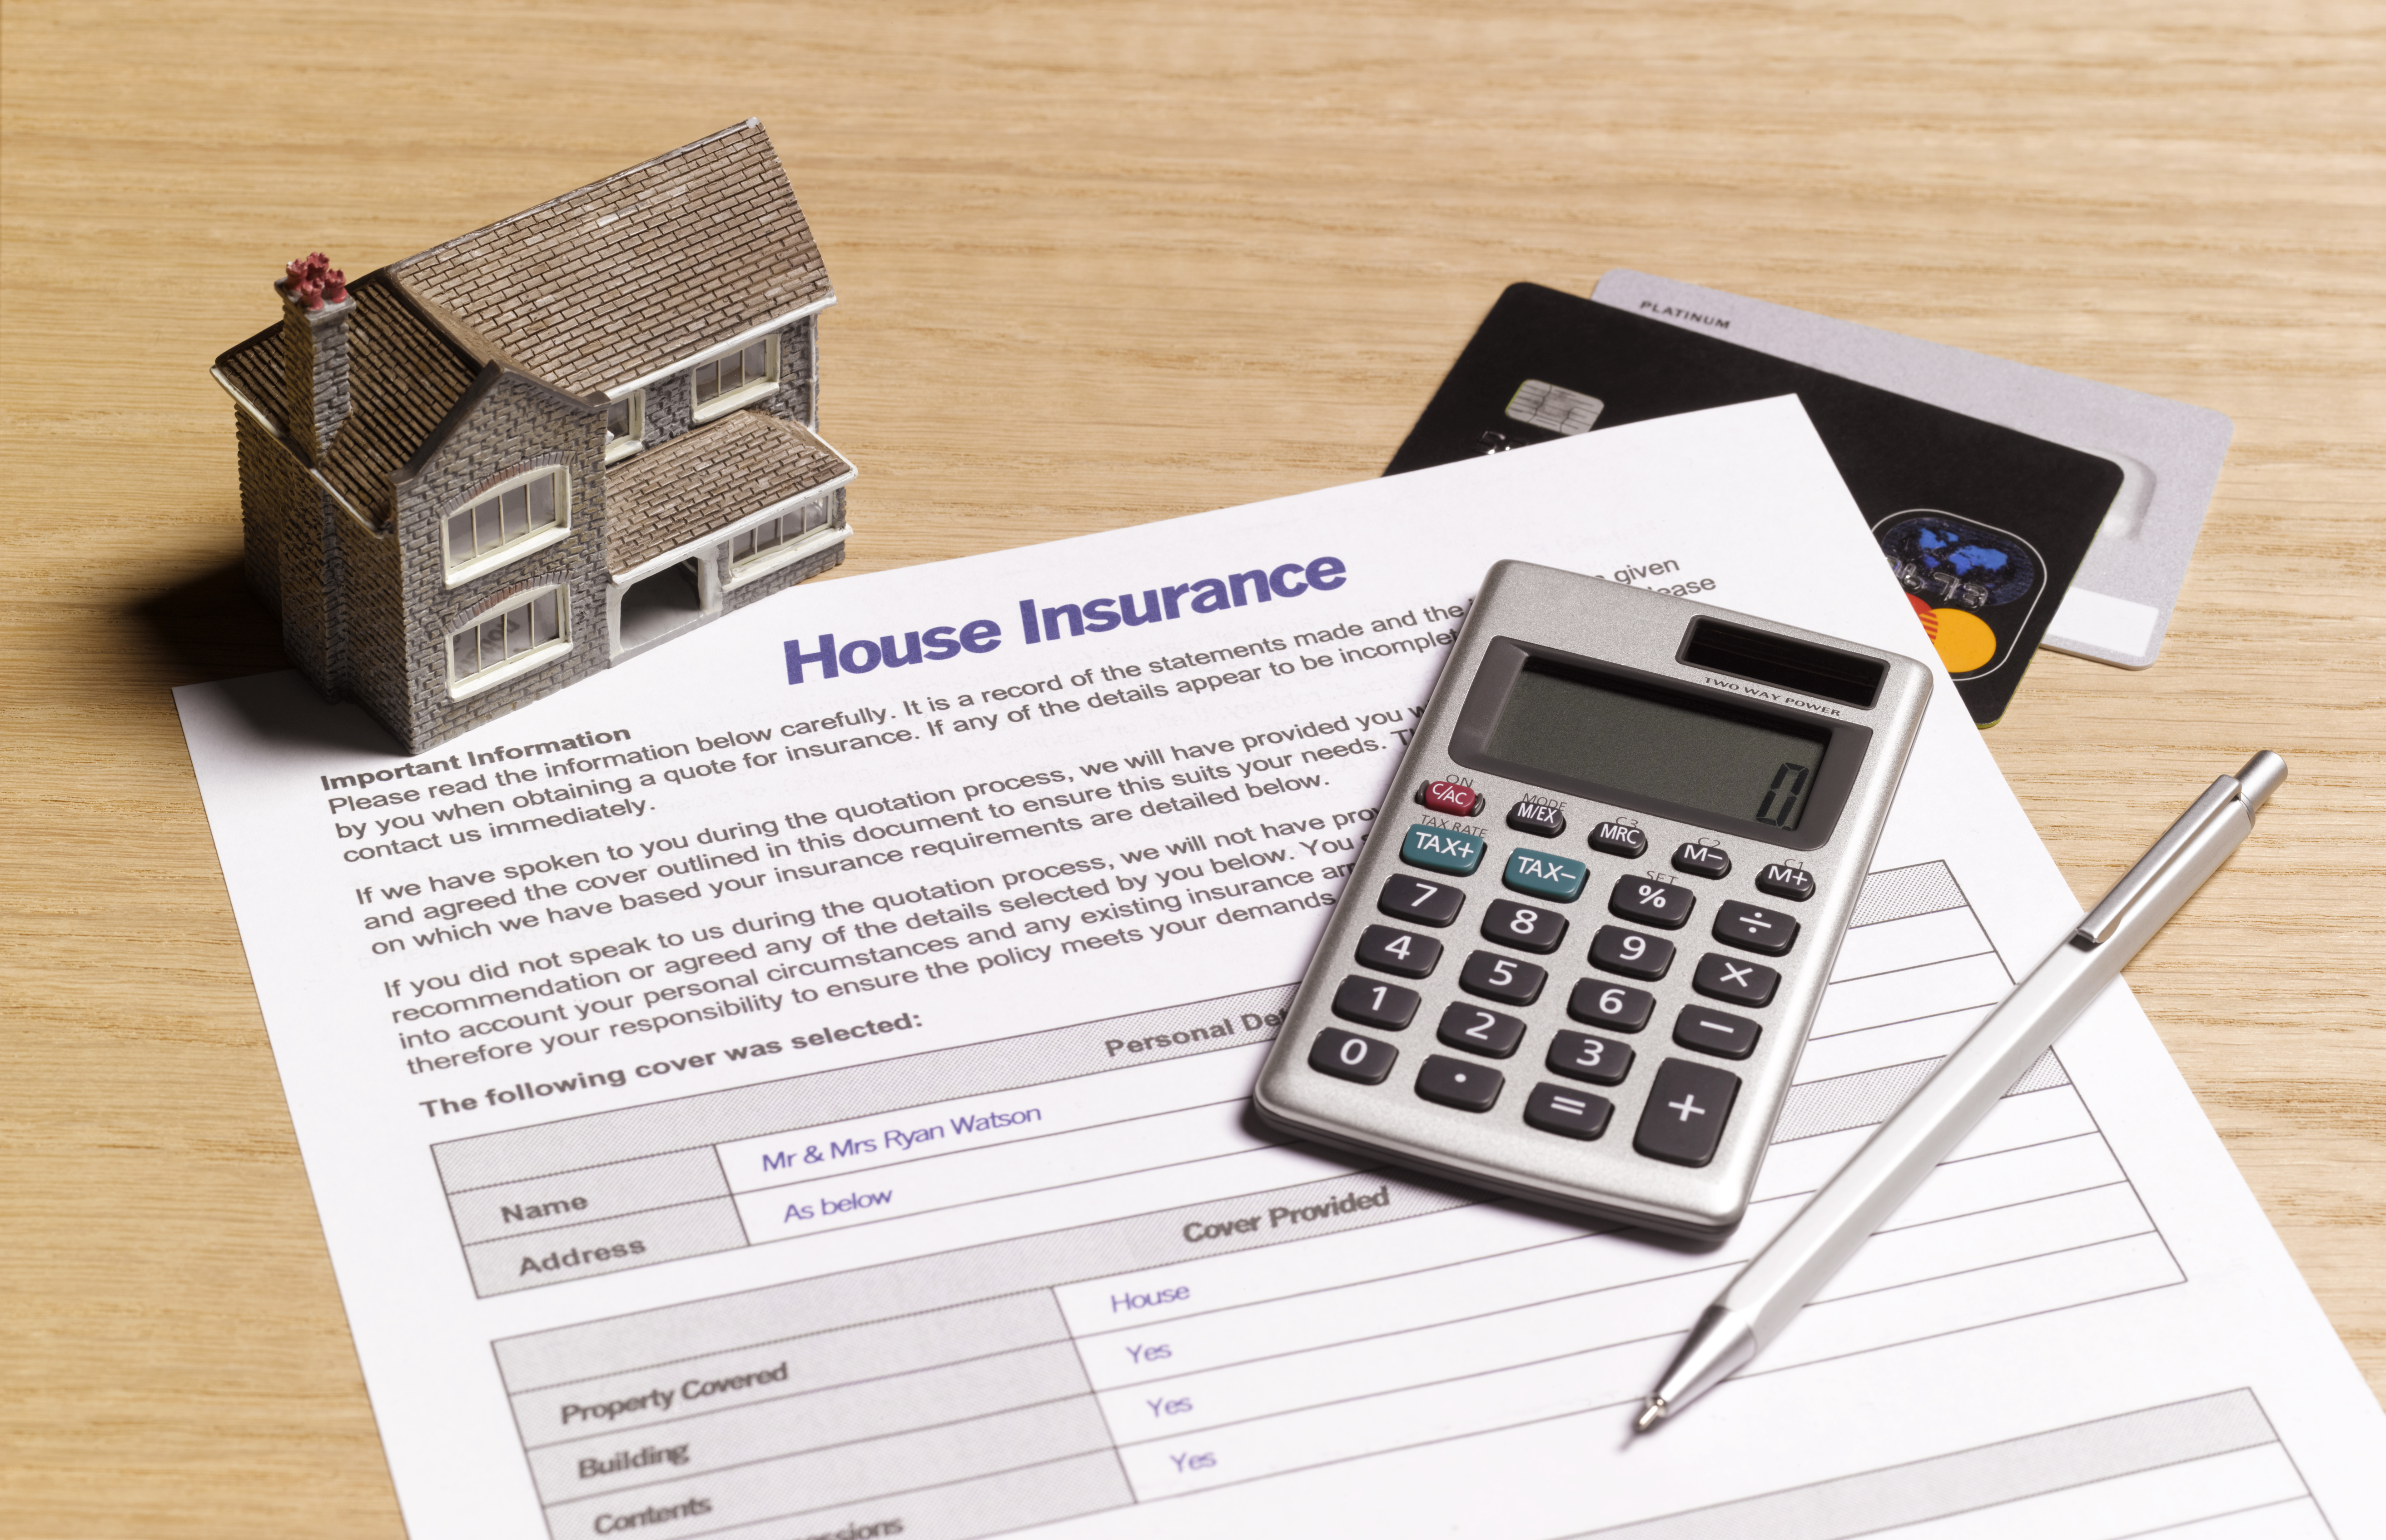 What should be considered when purchasing insurance coverage?